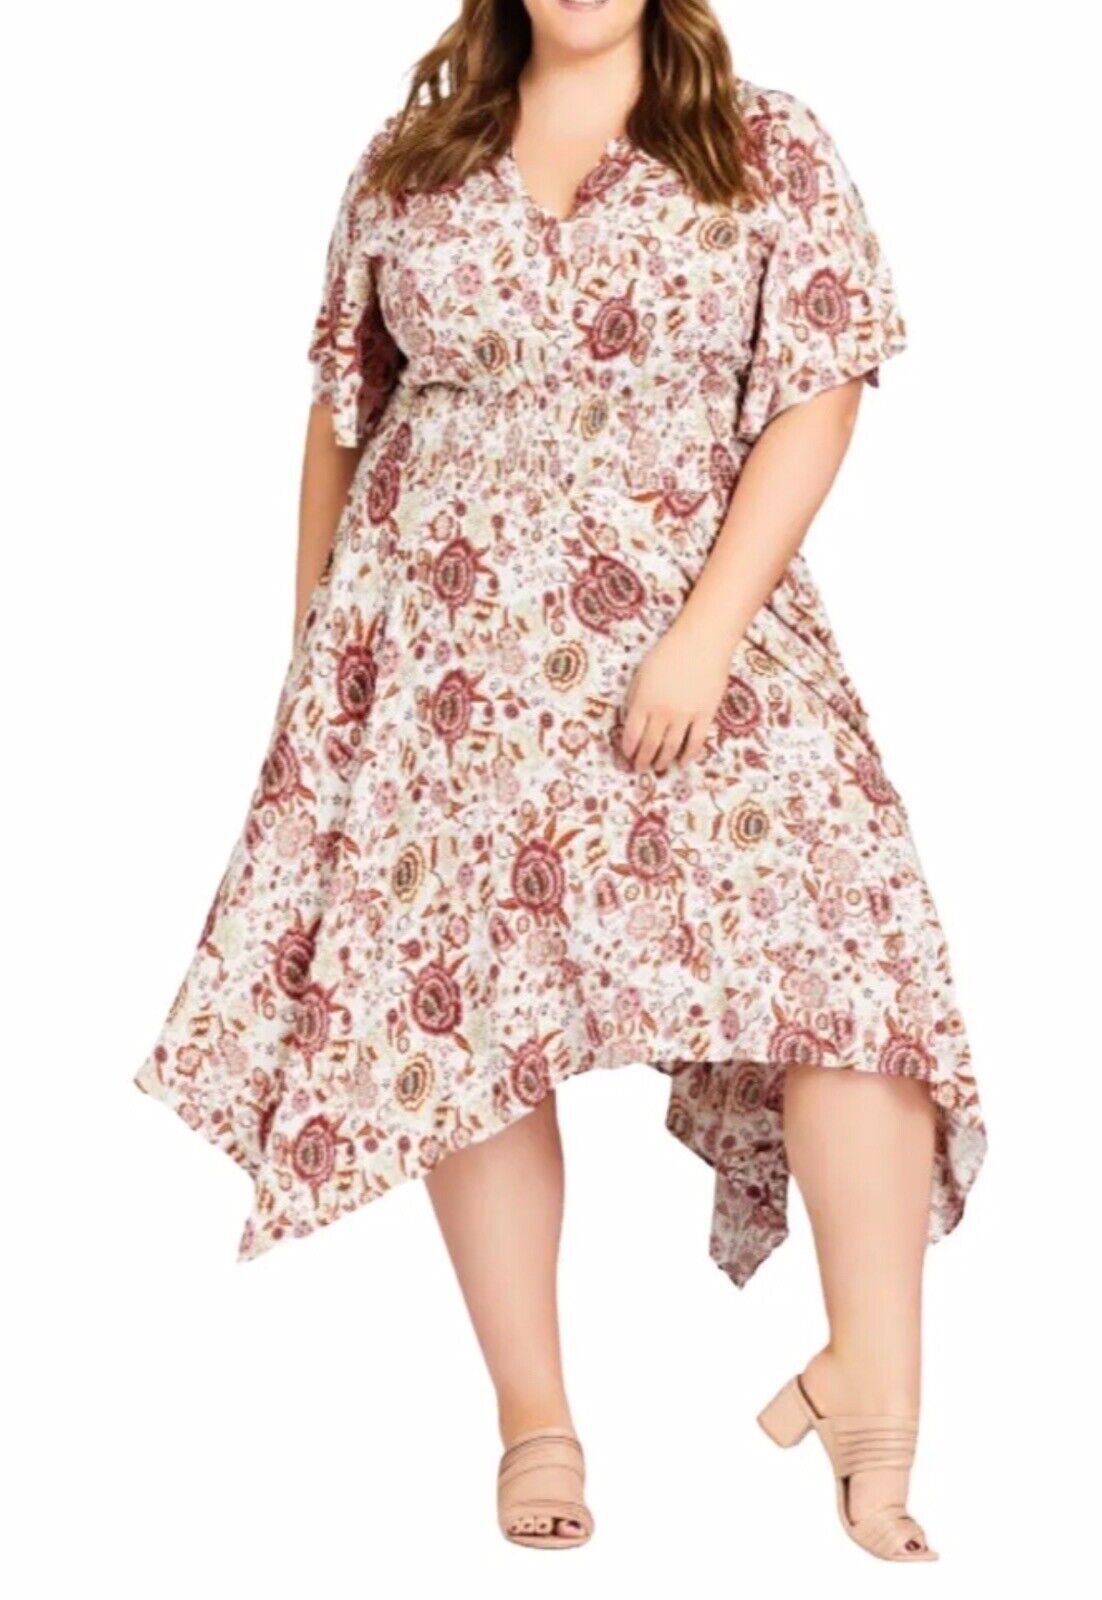 Avenue Plus Size Val Print Dress Toffee Bud Floral Print Size 30-32 NWT